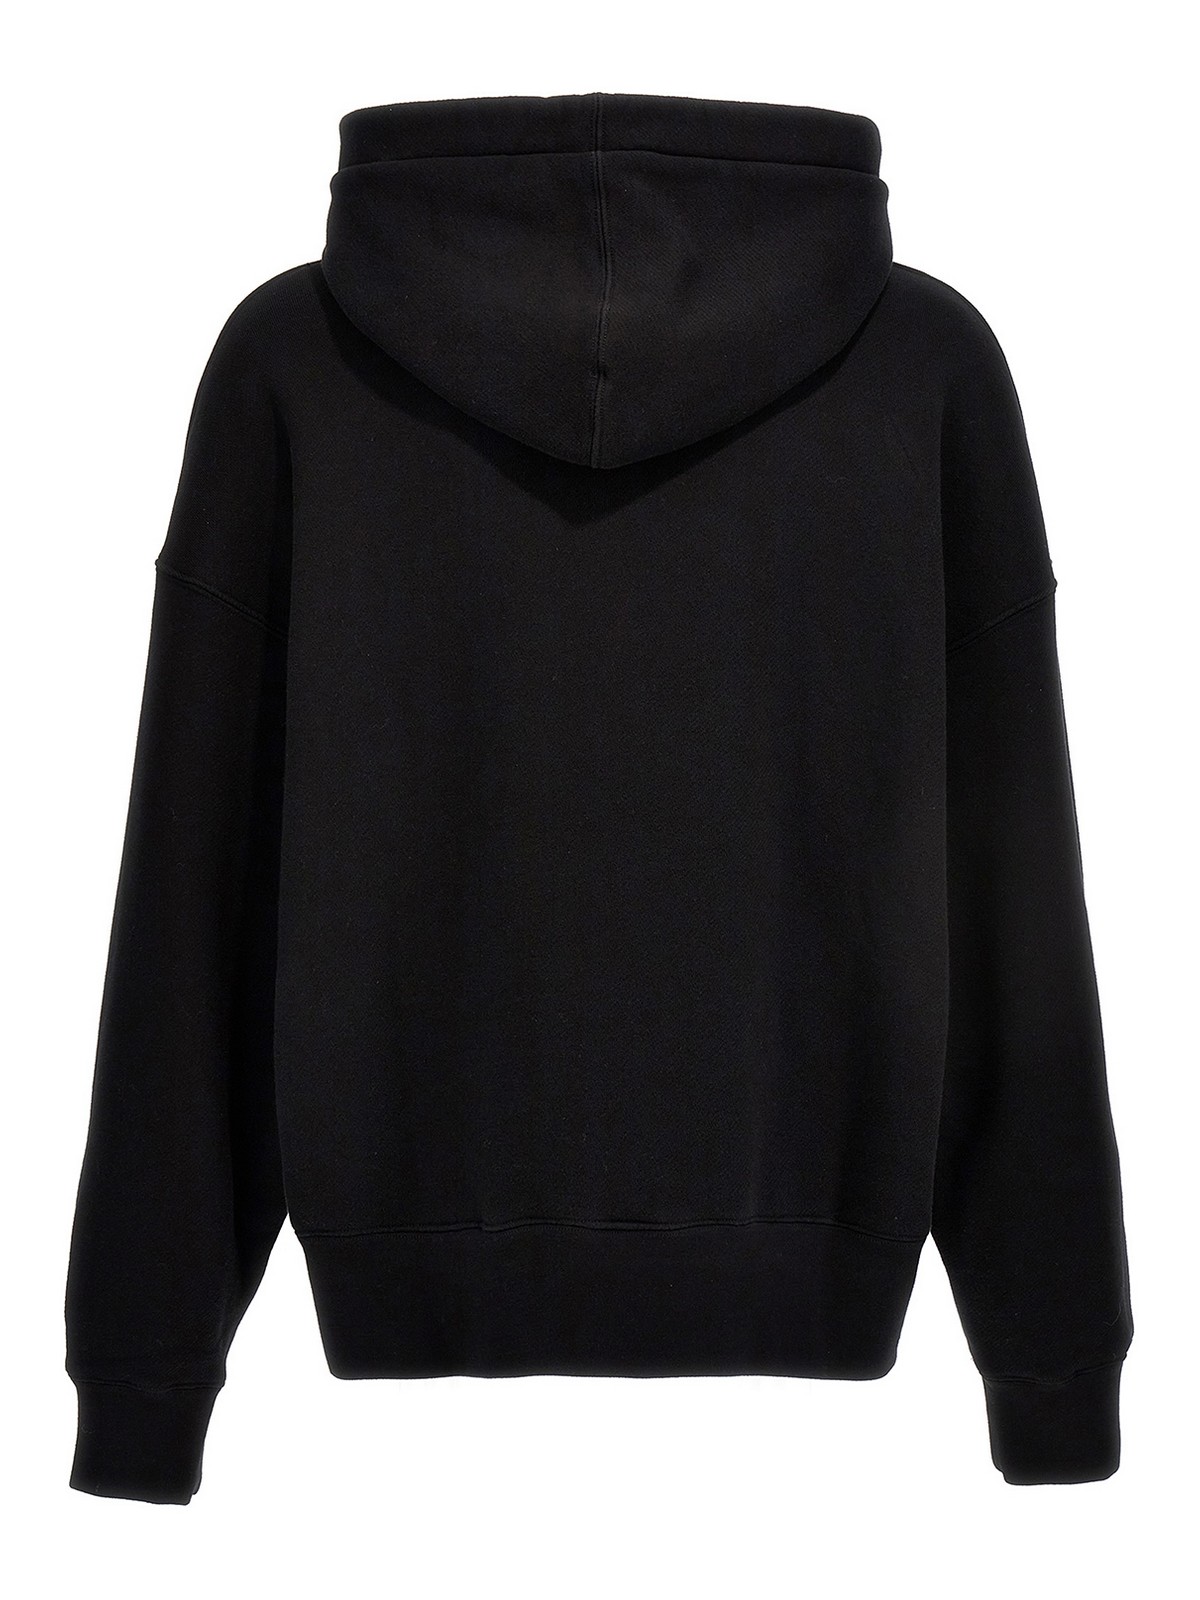 Shop Palm Angels Enzo From The Tropics Hoodie In Negro